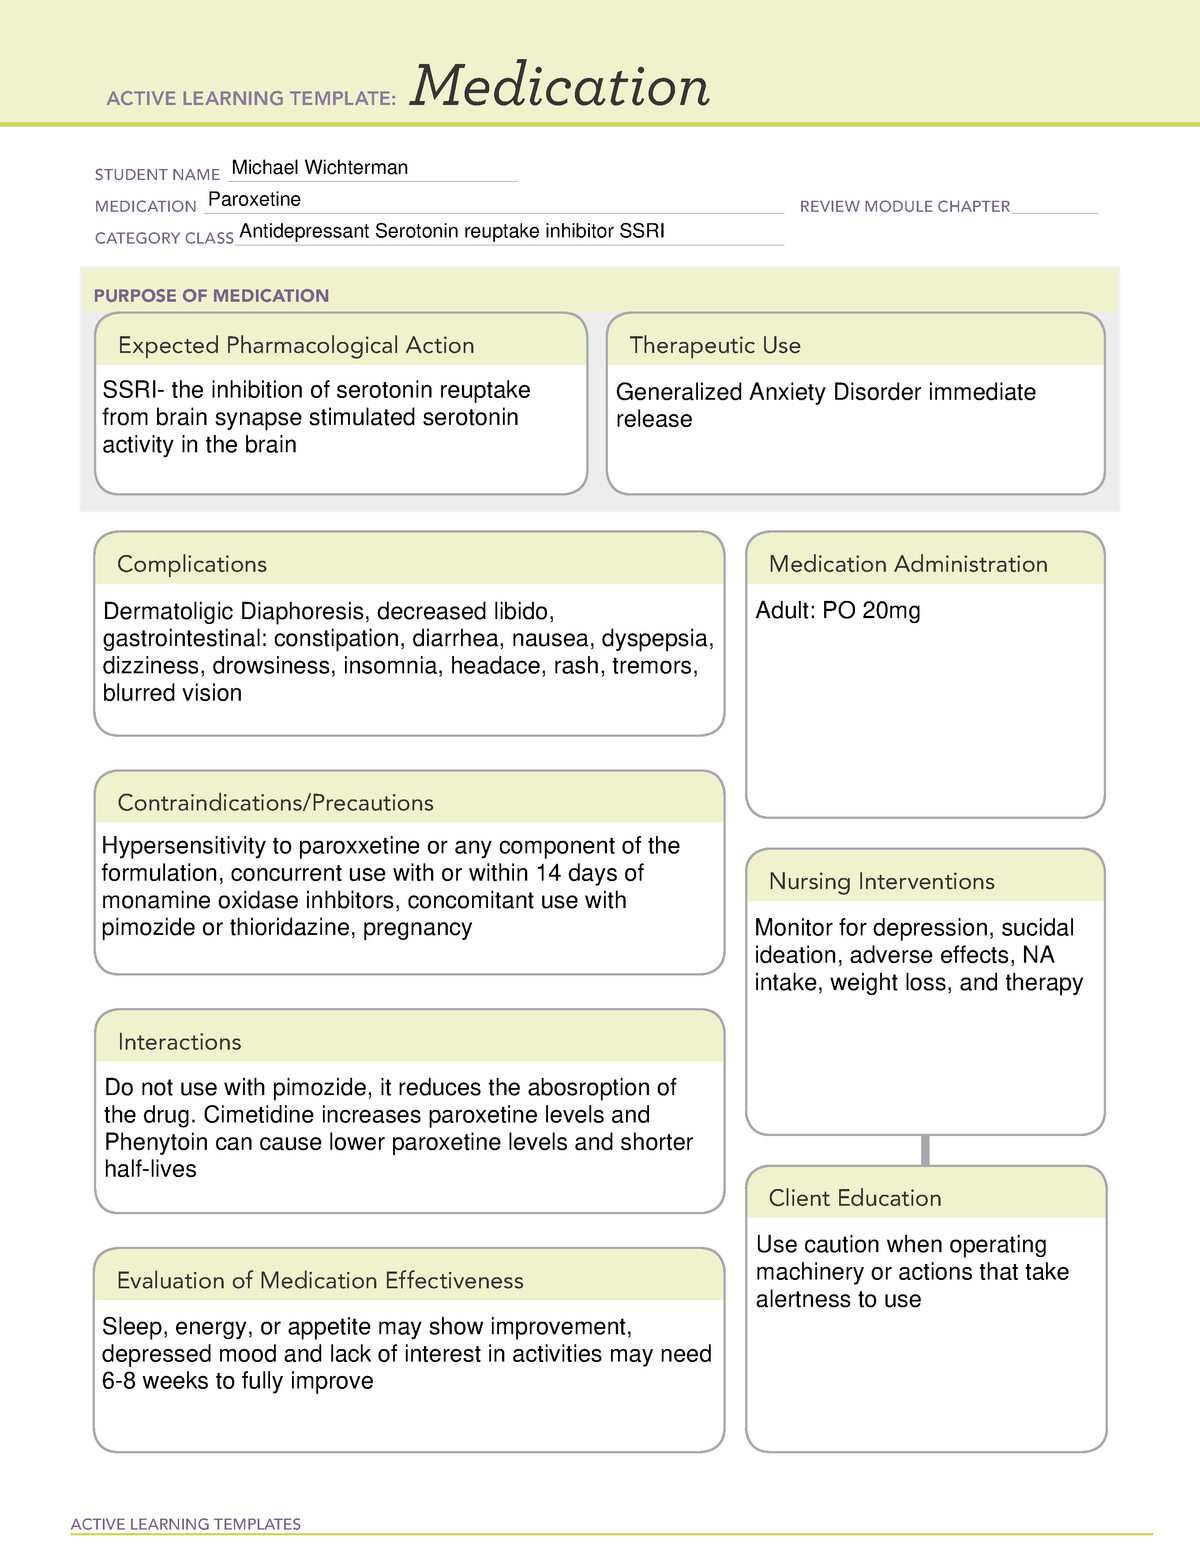 medication-paroxetine-ati-template-active-learning-templates